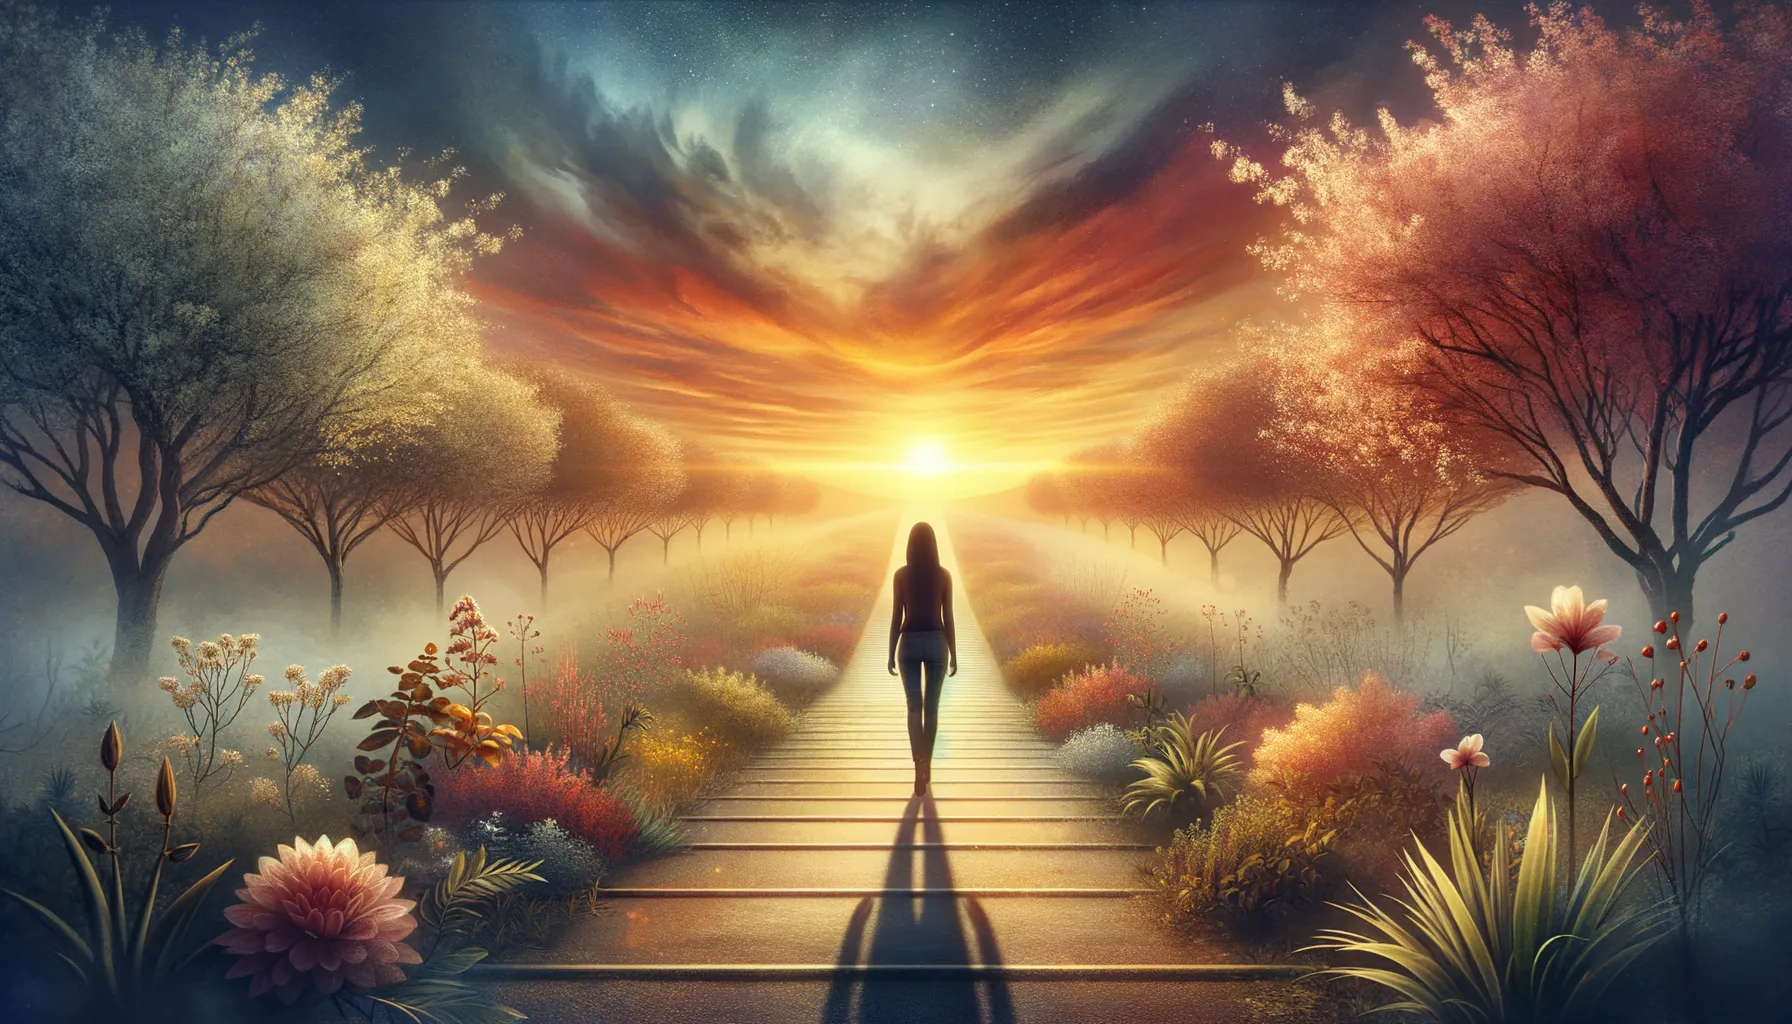 As the dawn breaks on the horizon, the path of self-discovery beckons, reminding us that with each step away from the situationships that confine us, we walk towards a future ripe with possibility and growth. Let this image inspire you to embrace the journey with courage and hope.